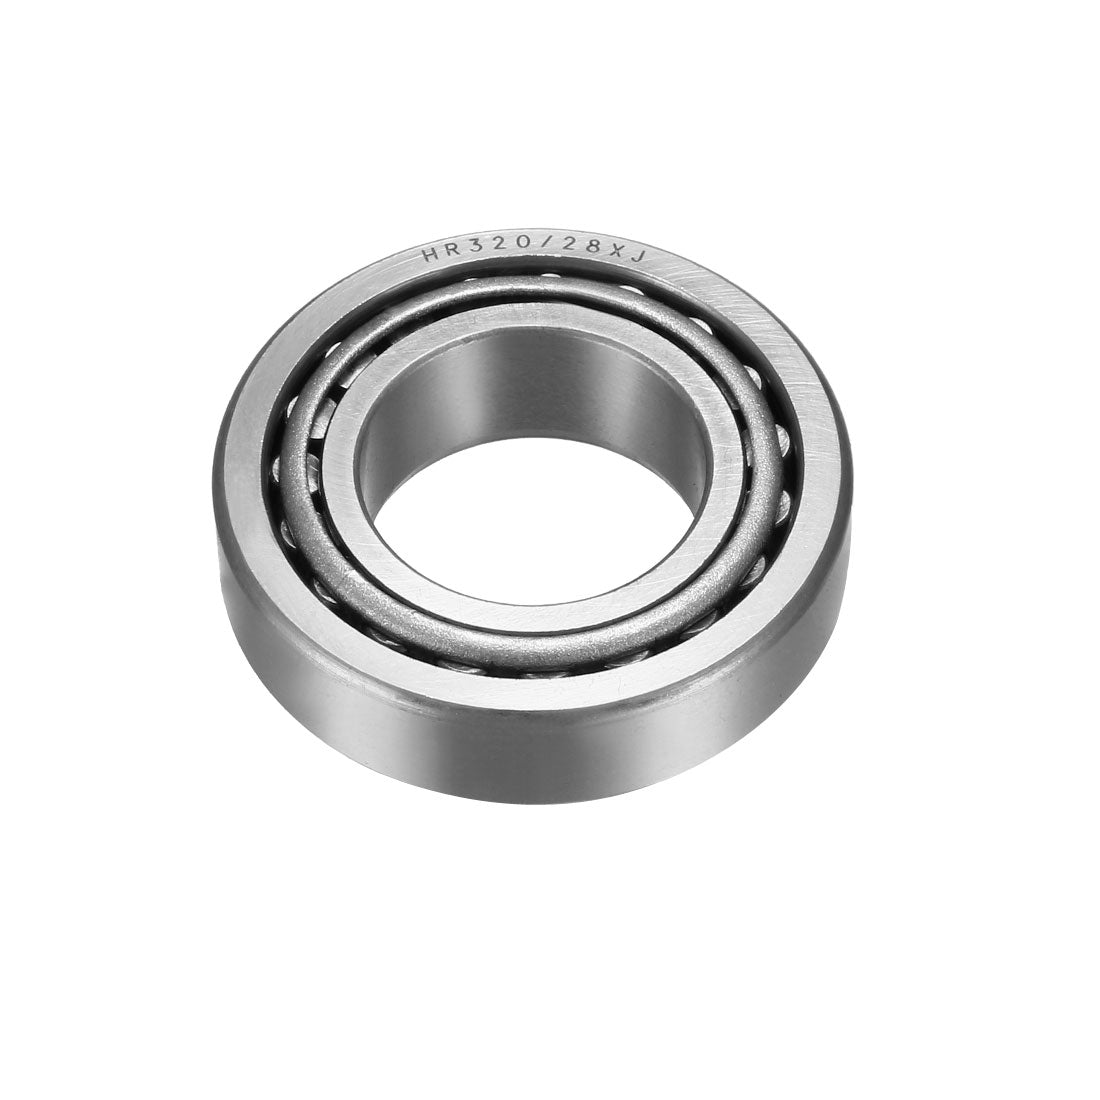 uxcell Uxcell HR320/28XJ Tapered Roller Bearing Cone and Cup Set 28mm Bore 52mm O.D. 2pcs